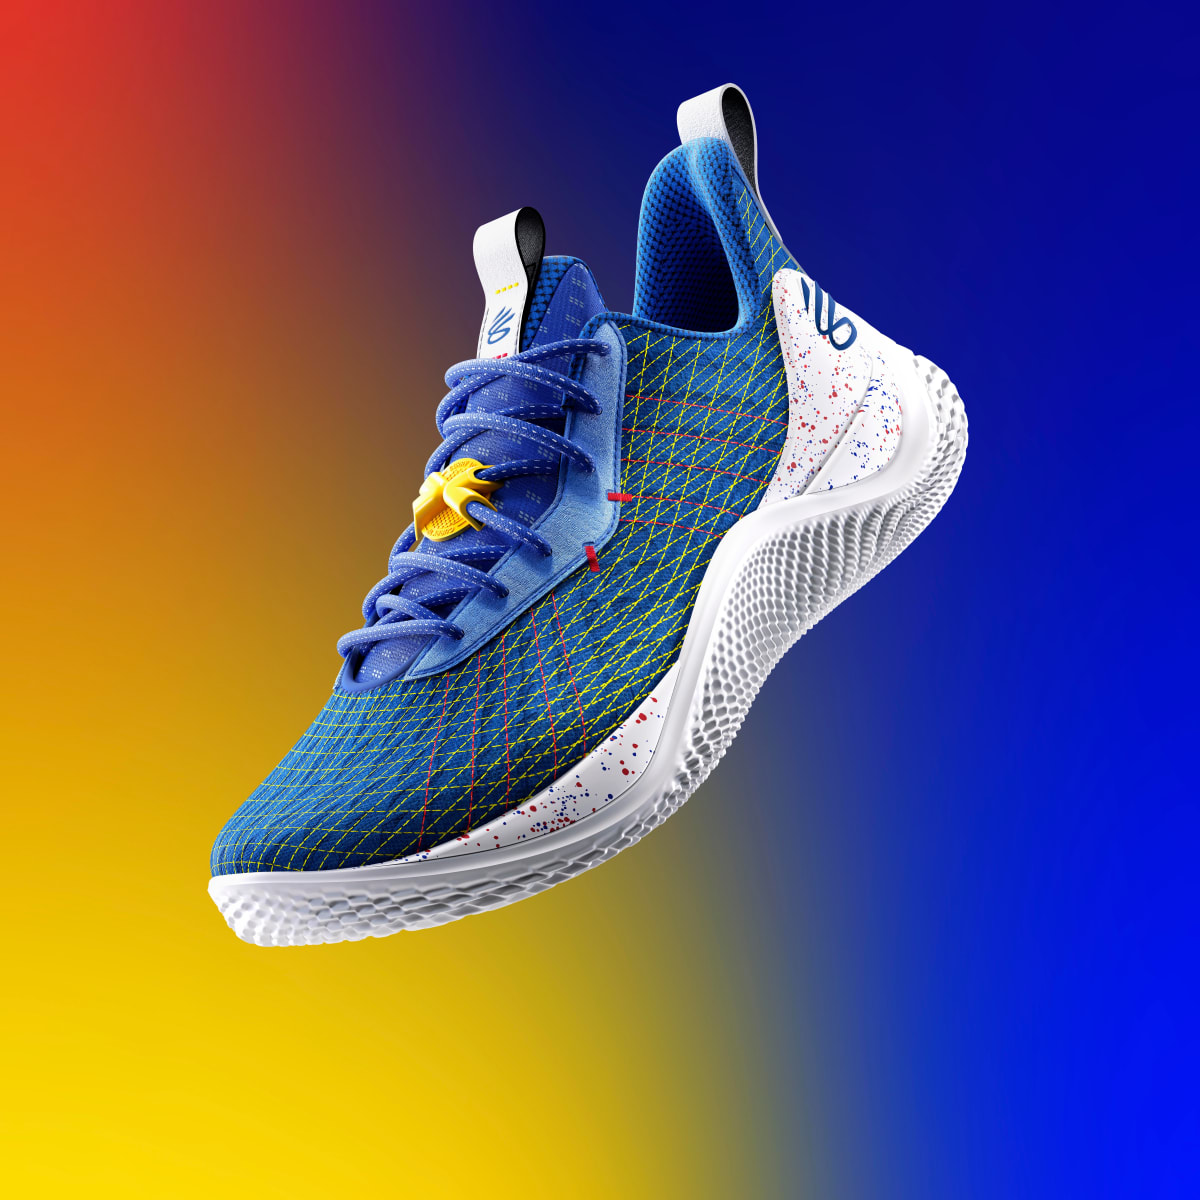 Under Armour Debuts Stephen Curry's First Signature Shoe